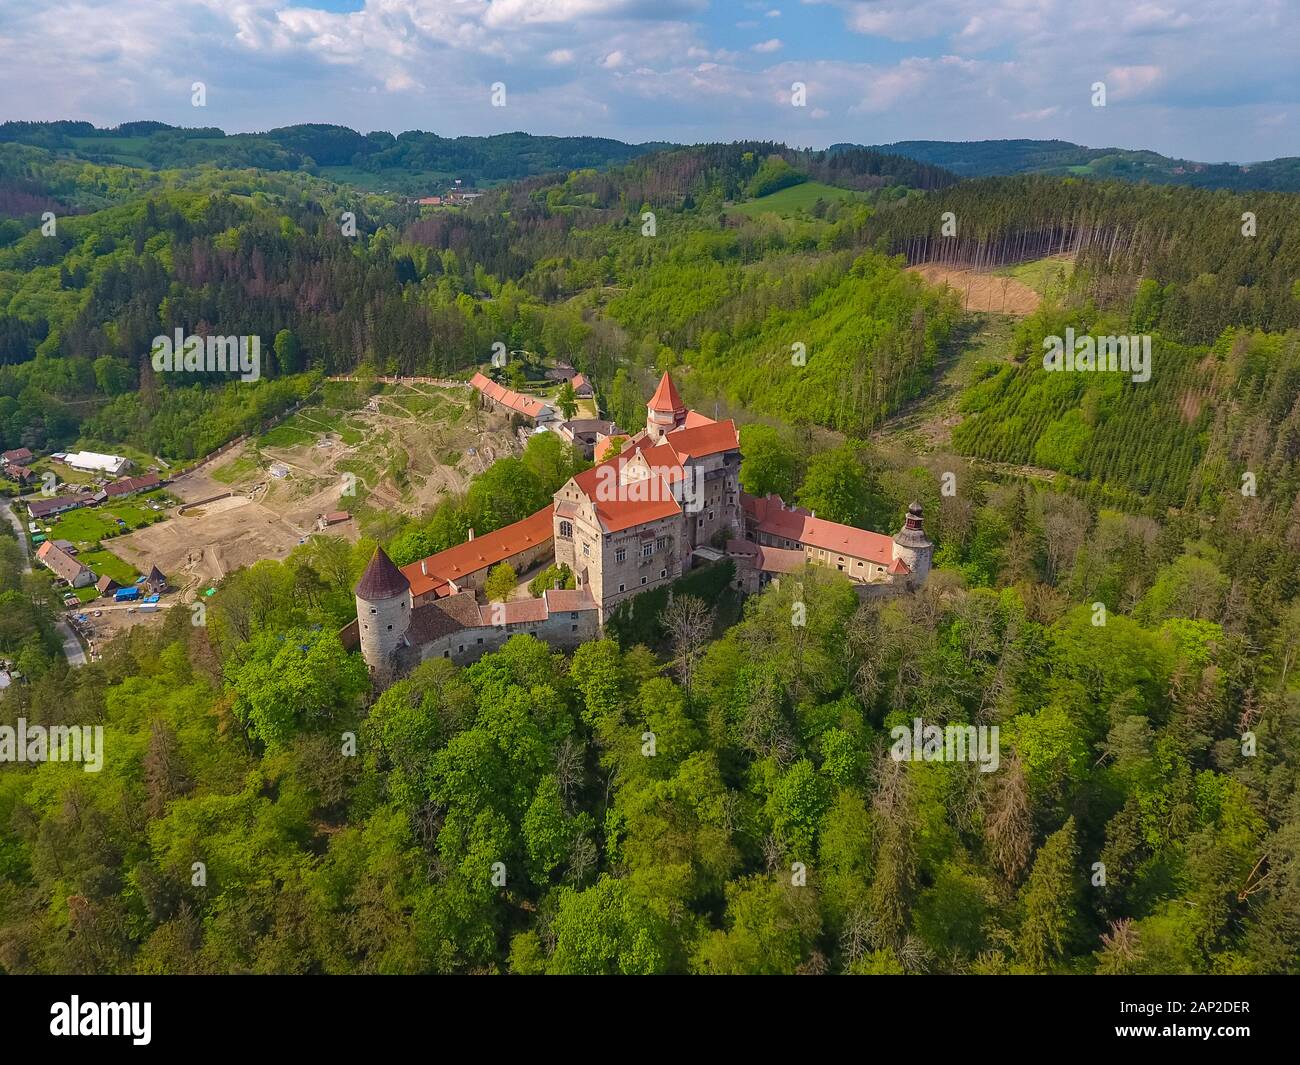 Aerial view of Moravian castle Pernstejn, standing on a hill above deep forests of the Bohemian-Moravian Highlands in Czech Republic Stock Photo